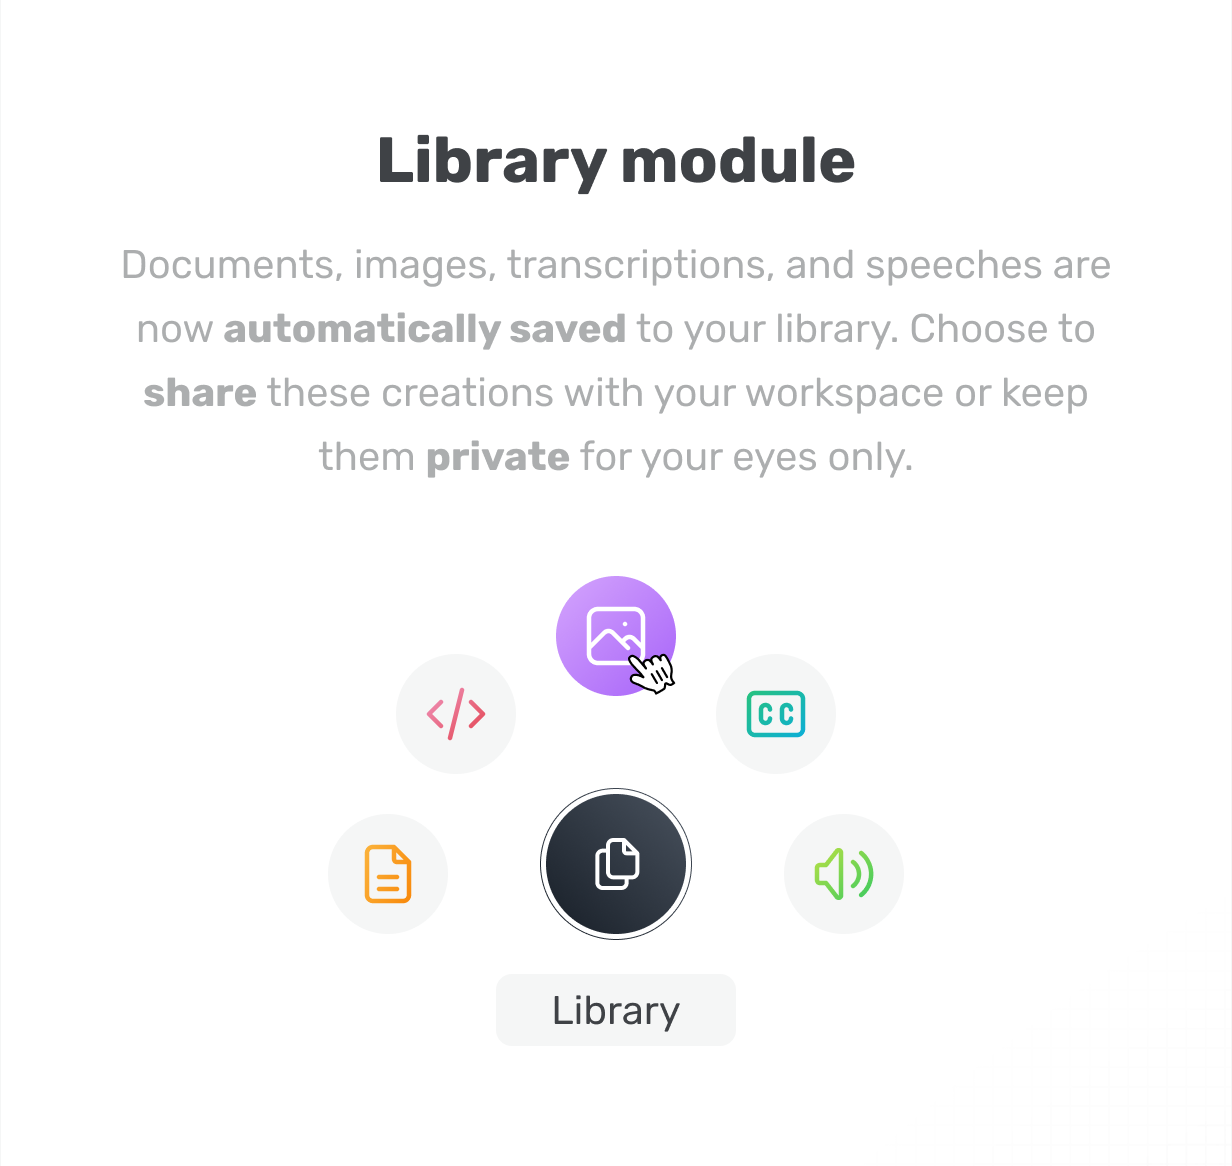 Documents, images, transcriptions, and speeches automatically saved to library aikeedo @heyaikeedo